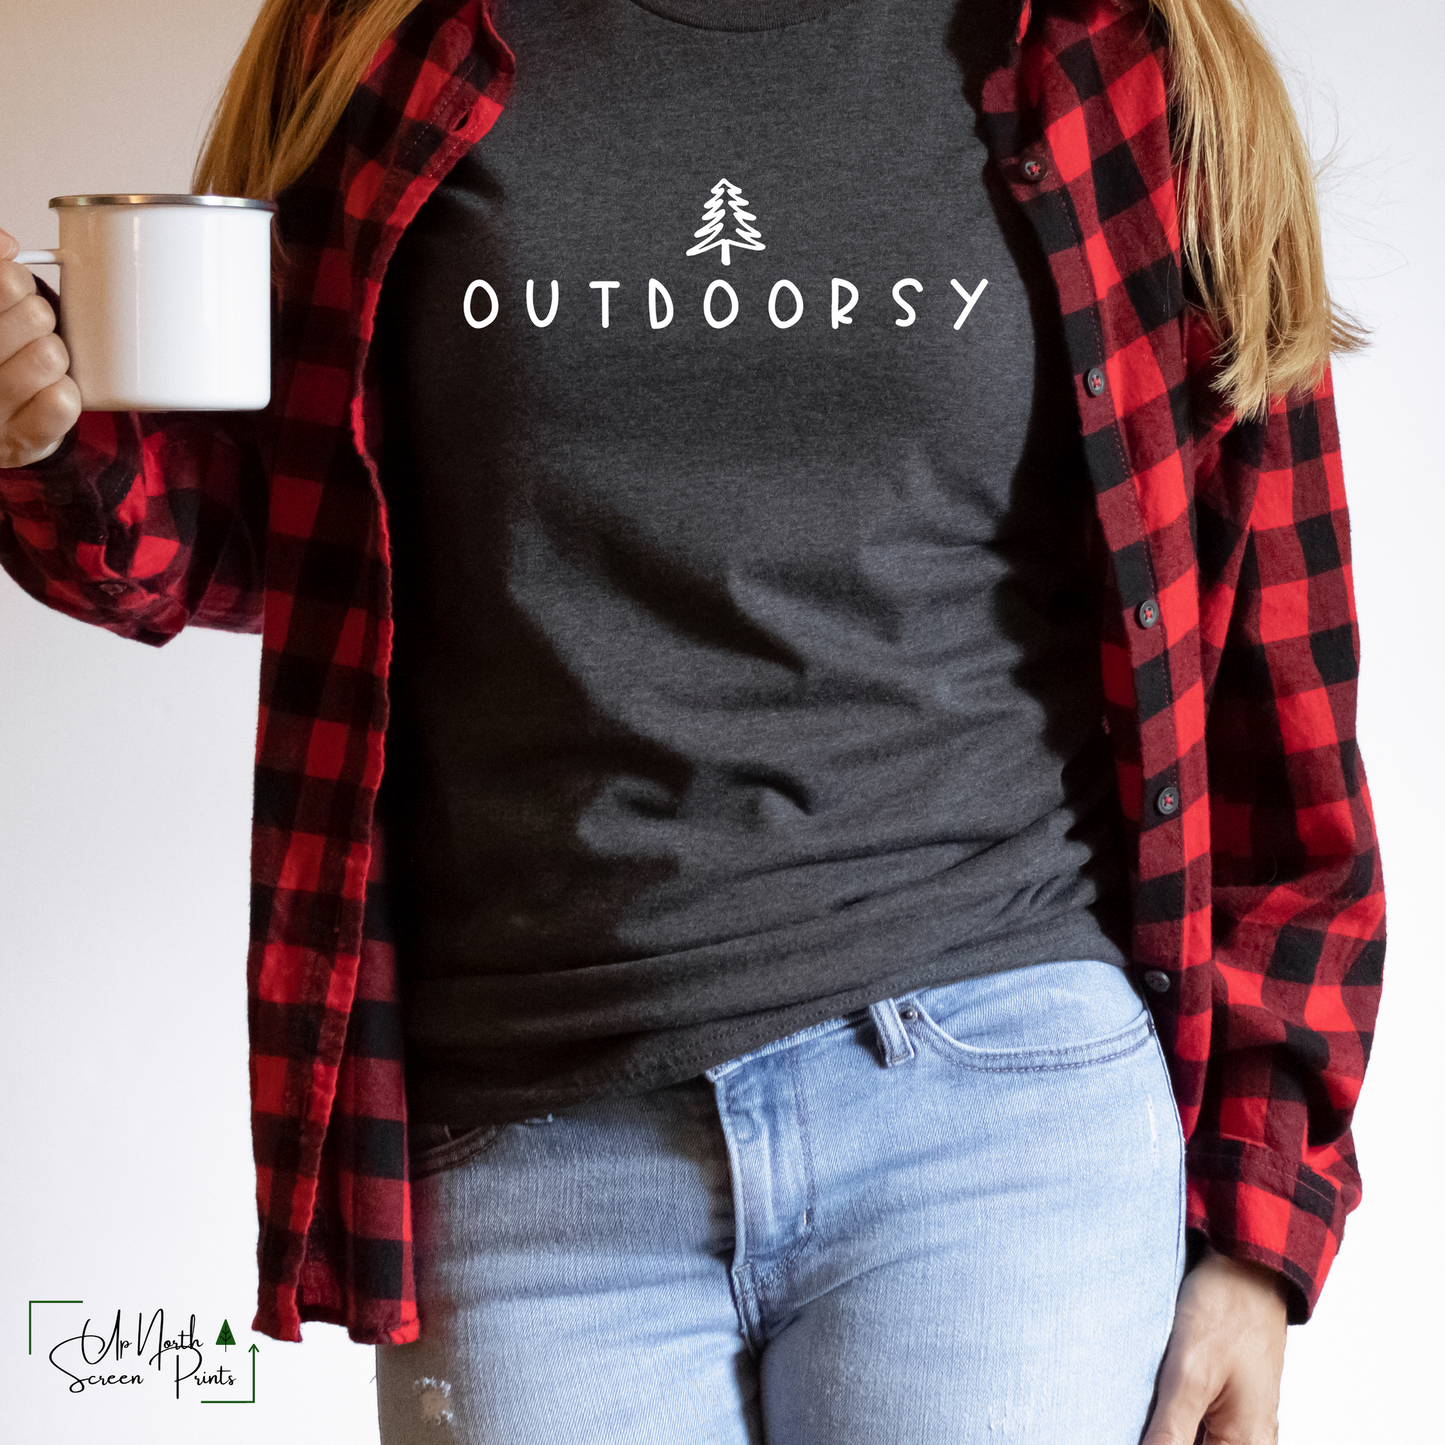 OUTDOORSY T-SHIRT SWEATER OR TANK TOP